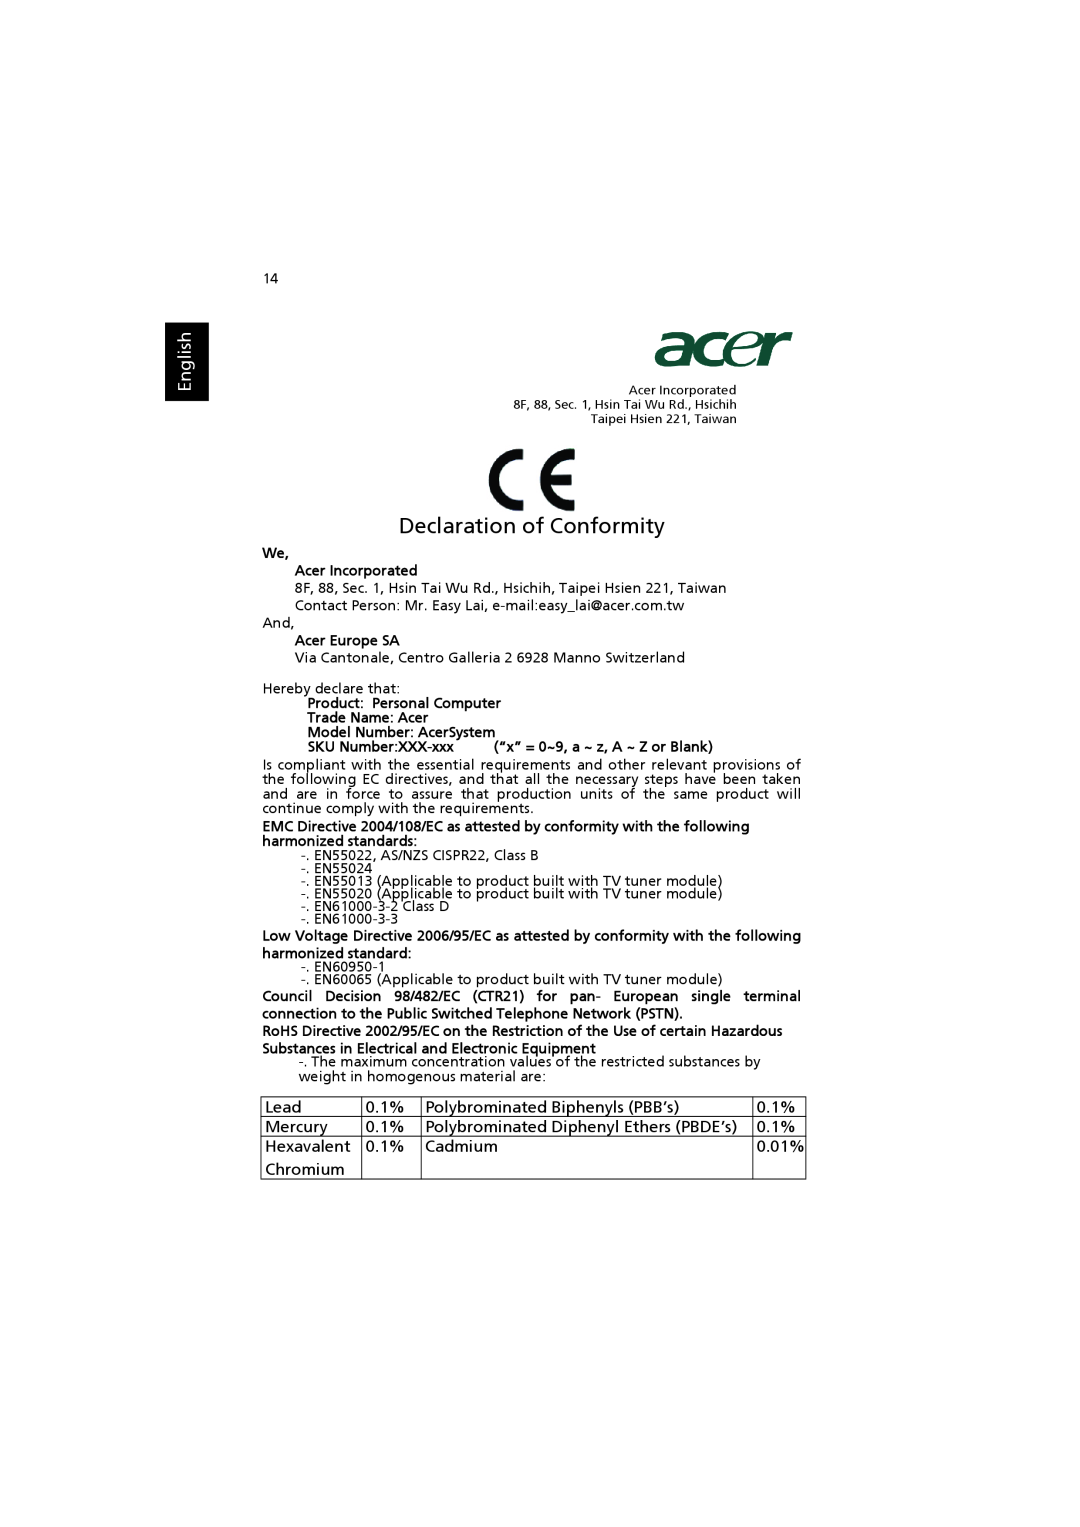 Acer AS001, X1300 manual Declaration of Conformity, English 